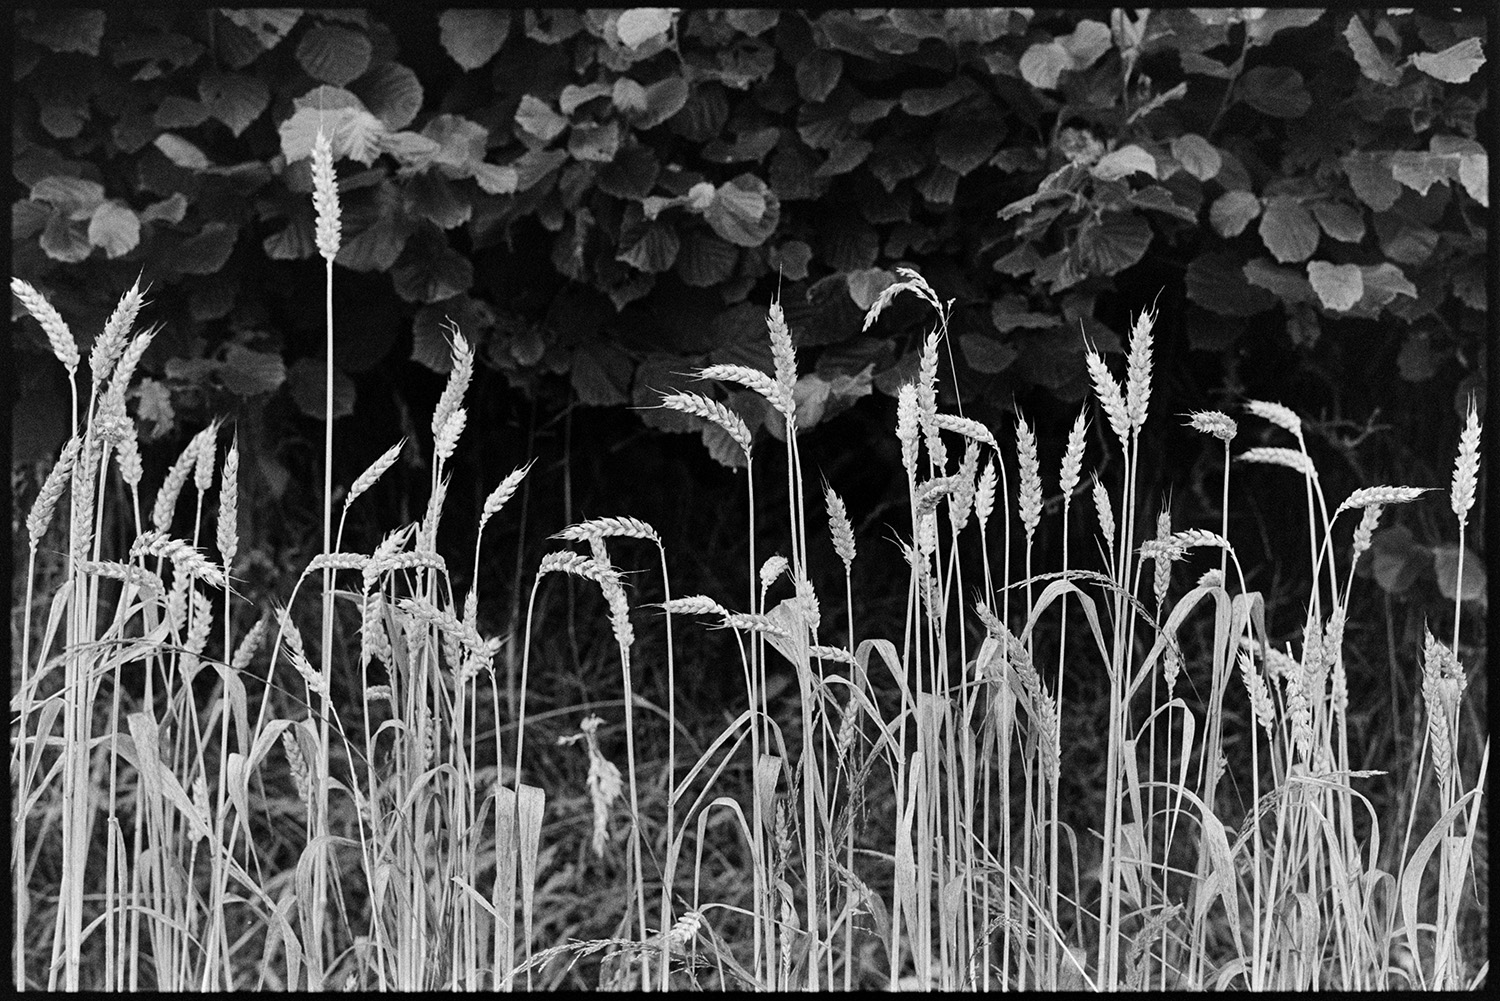 Close ups of corn against hedge. 
[A close up view of sheaves of corn growing by a hedge in a field at Westacott, Riddlecombe.]